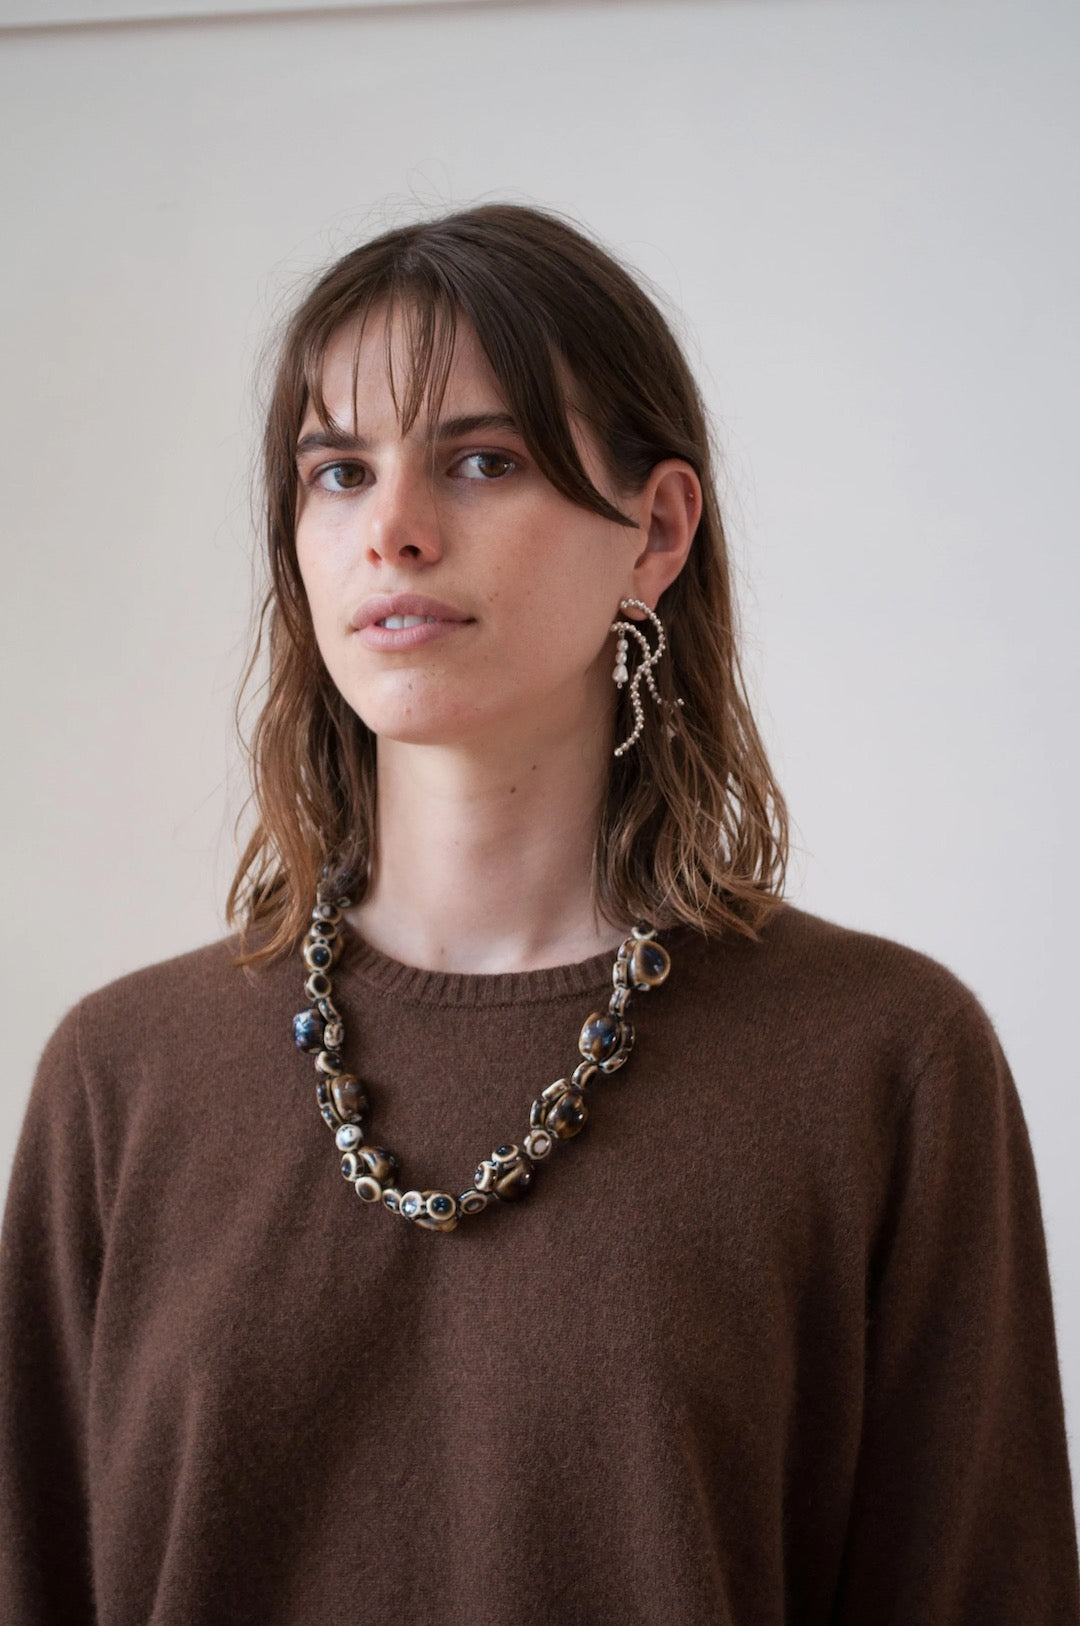 A woman wearing a OVNA OVICH Kom Jumper – Mud sweater and necklace.